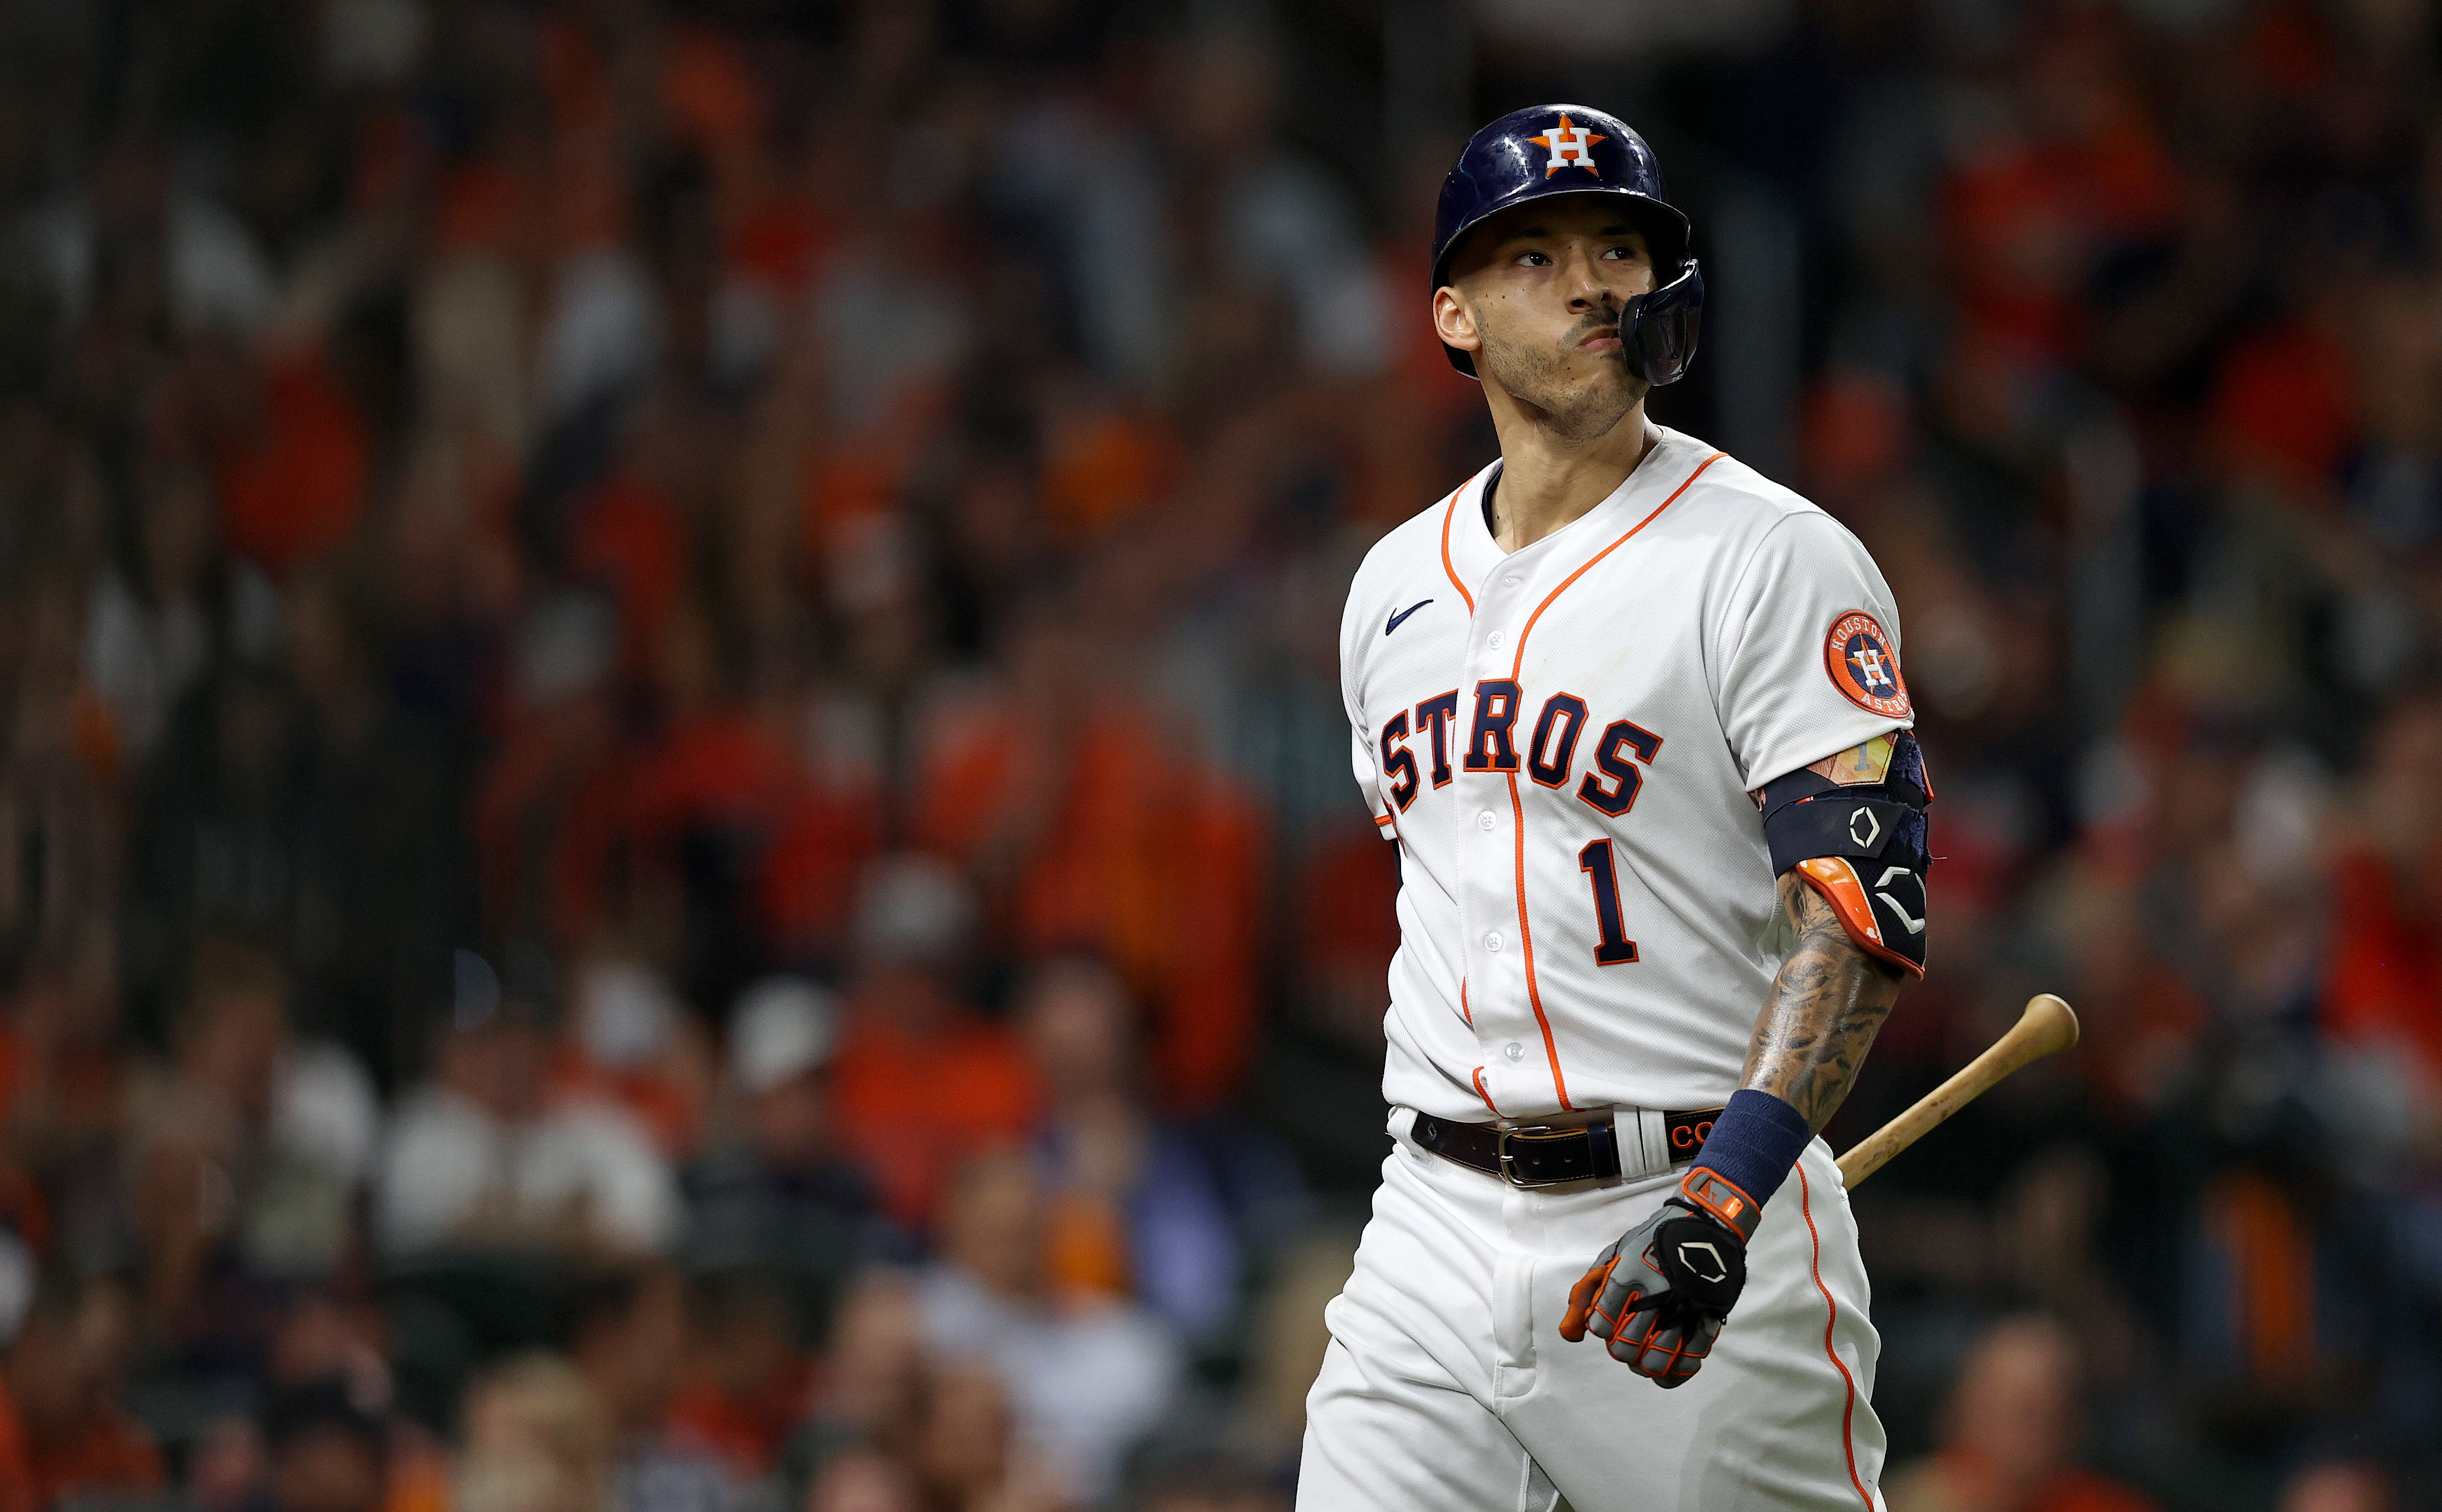 Former Houston Astros shortstop and Chicago Cubs free-agent target Carlos Correa reacts during the 2021 MLB World Series